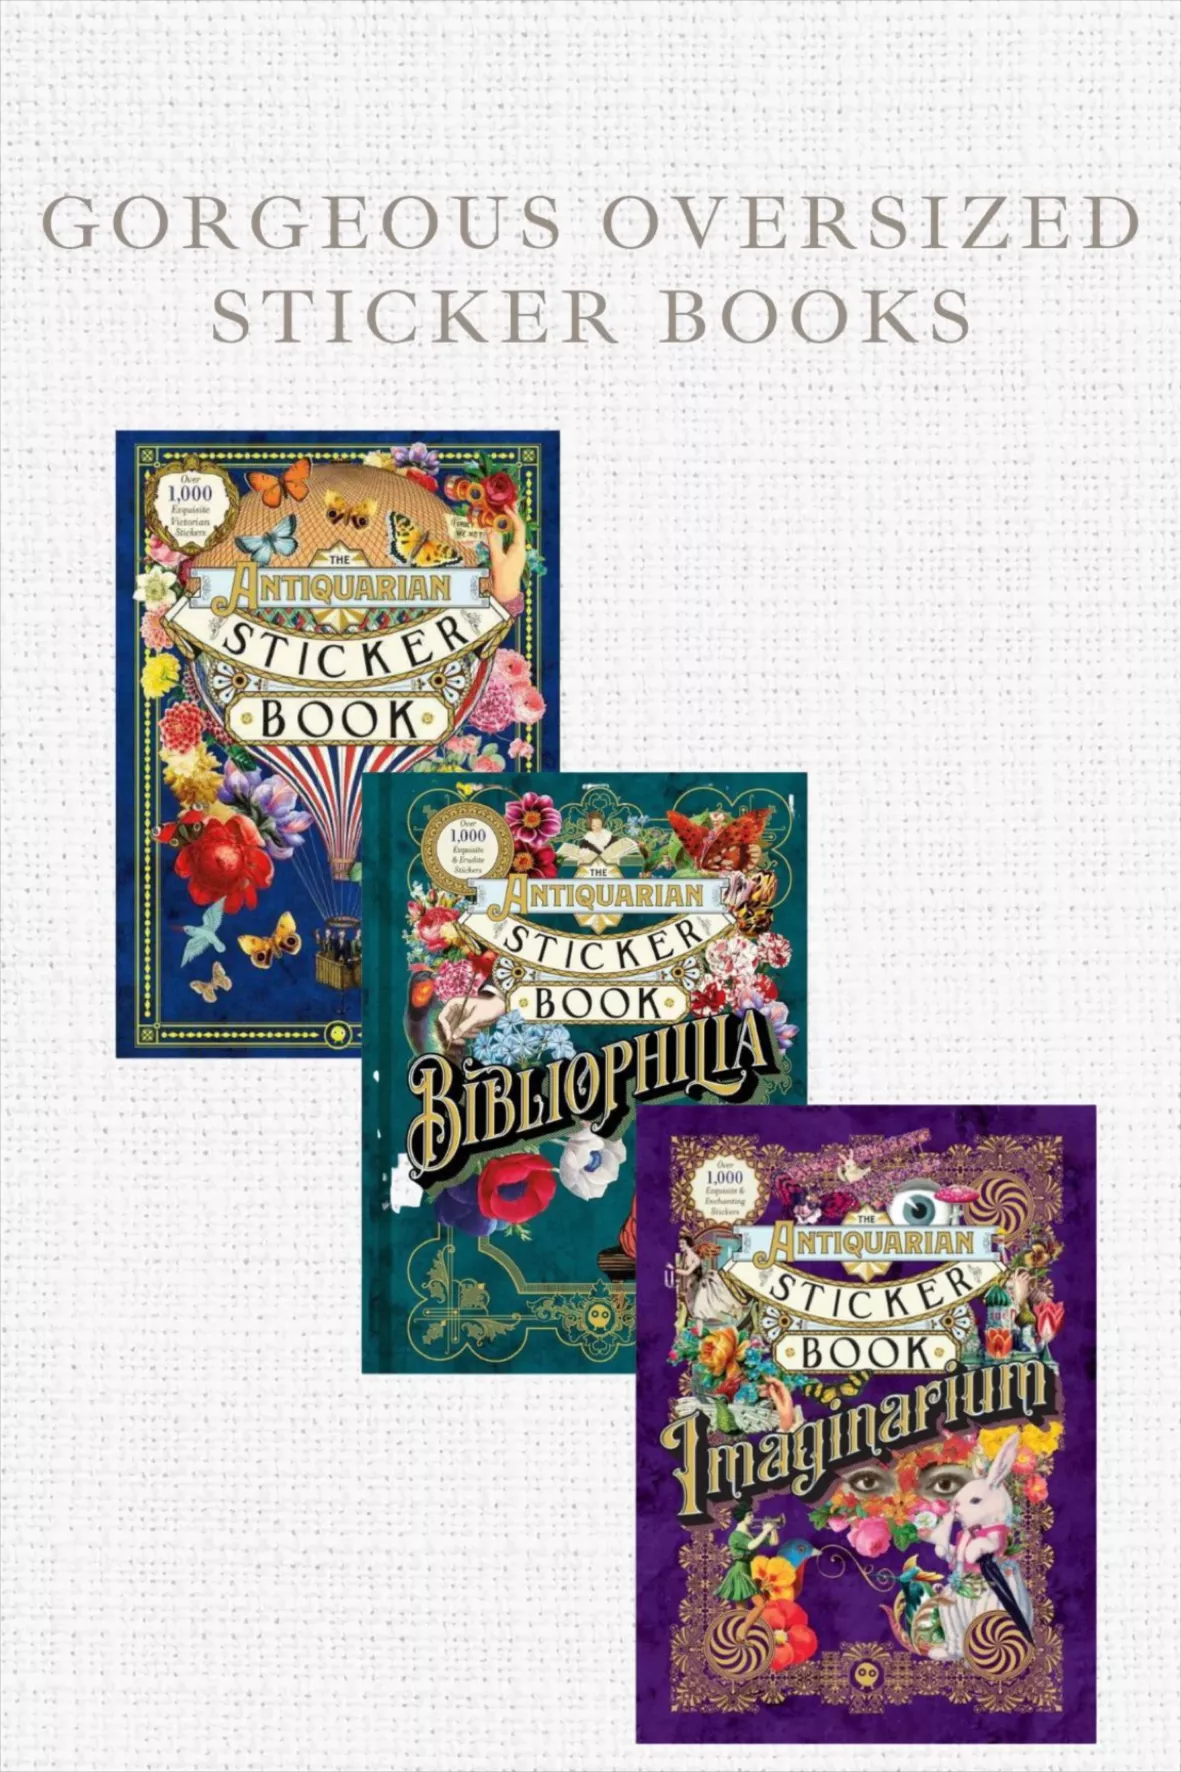 The Antiquarian Sticker Book: Over 1,000 Exquisite Victorian Stickers [Book]